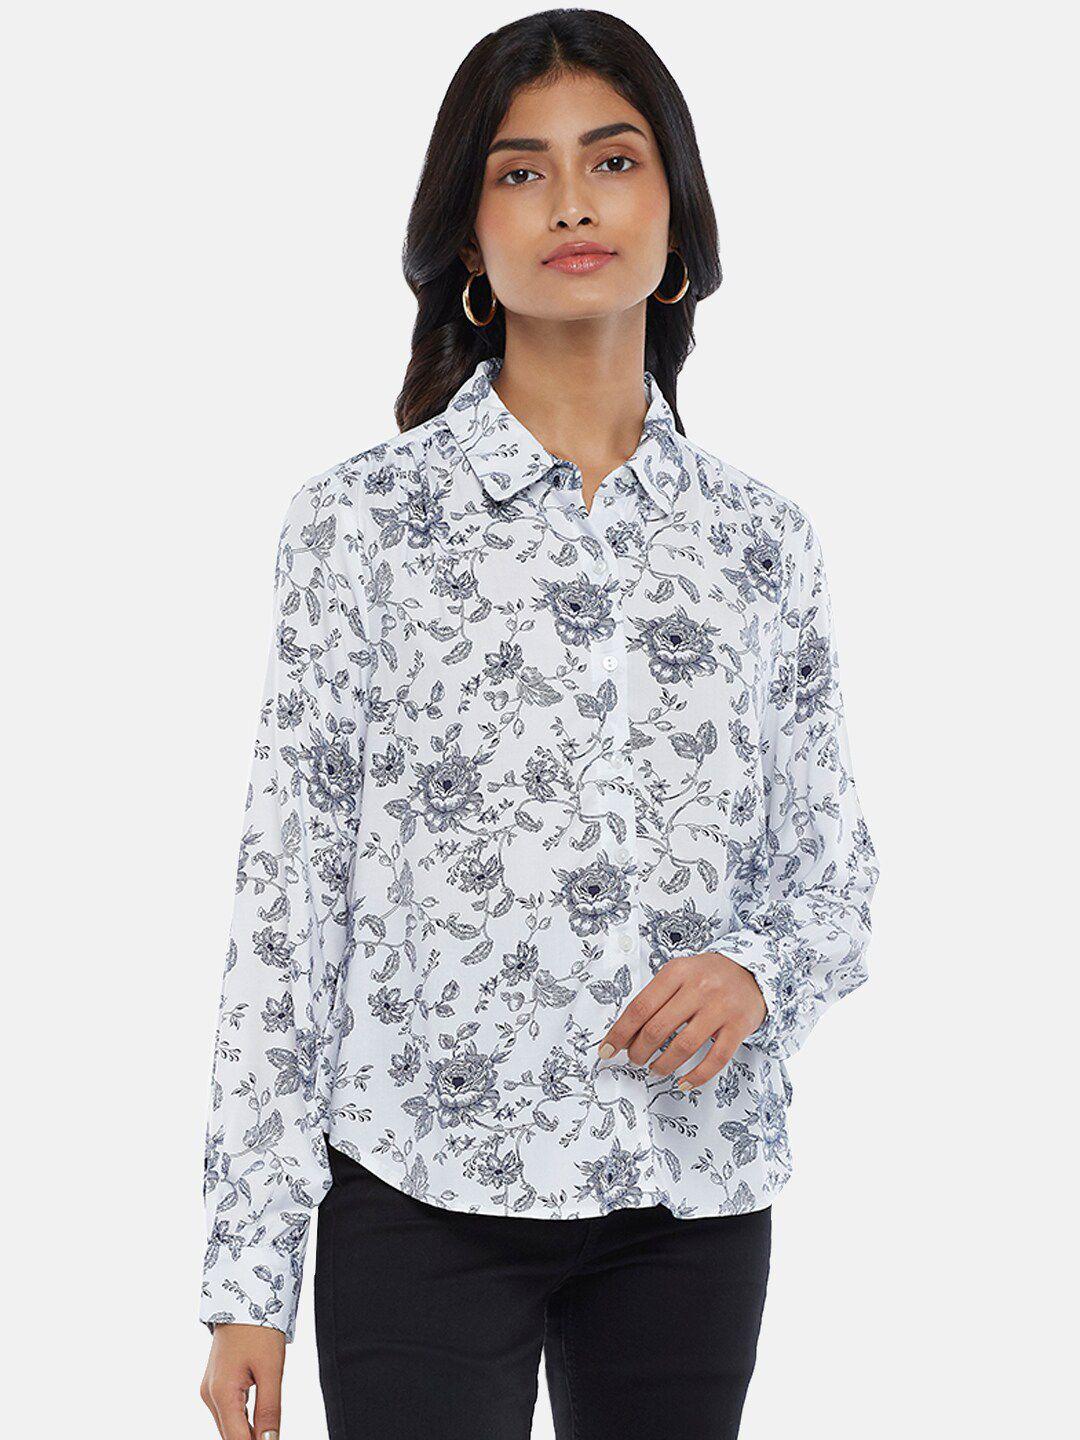 honey by pantaloons women off white floral printed casual shirt